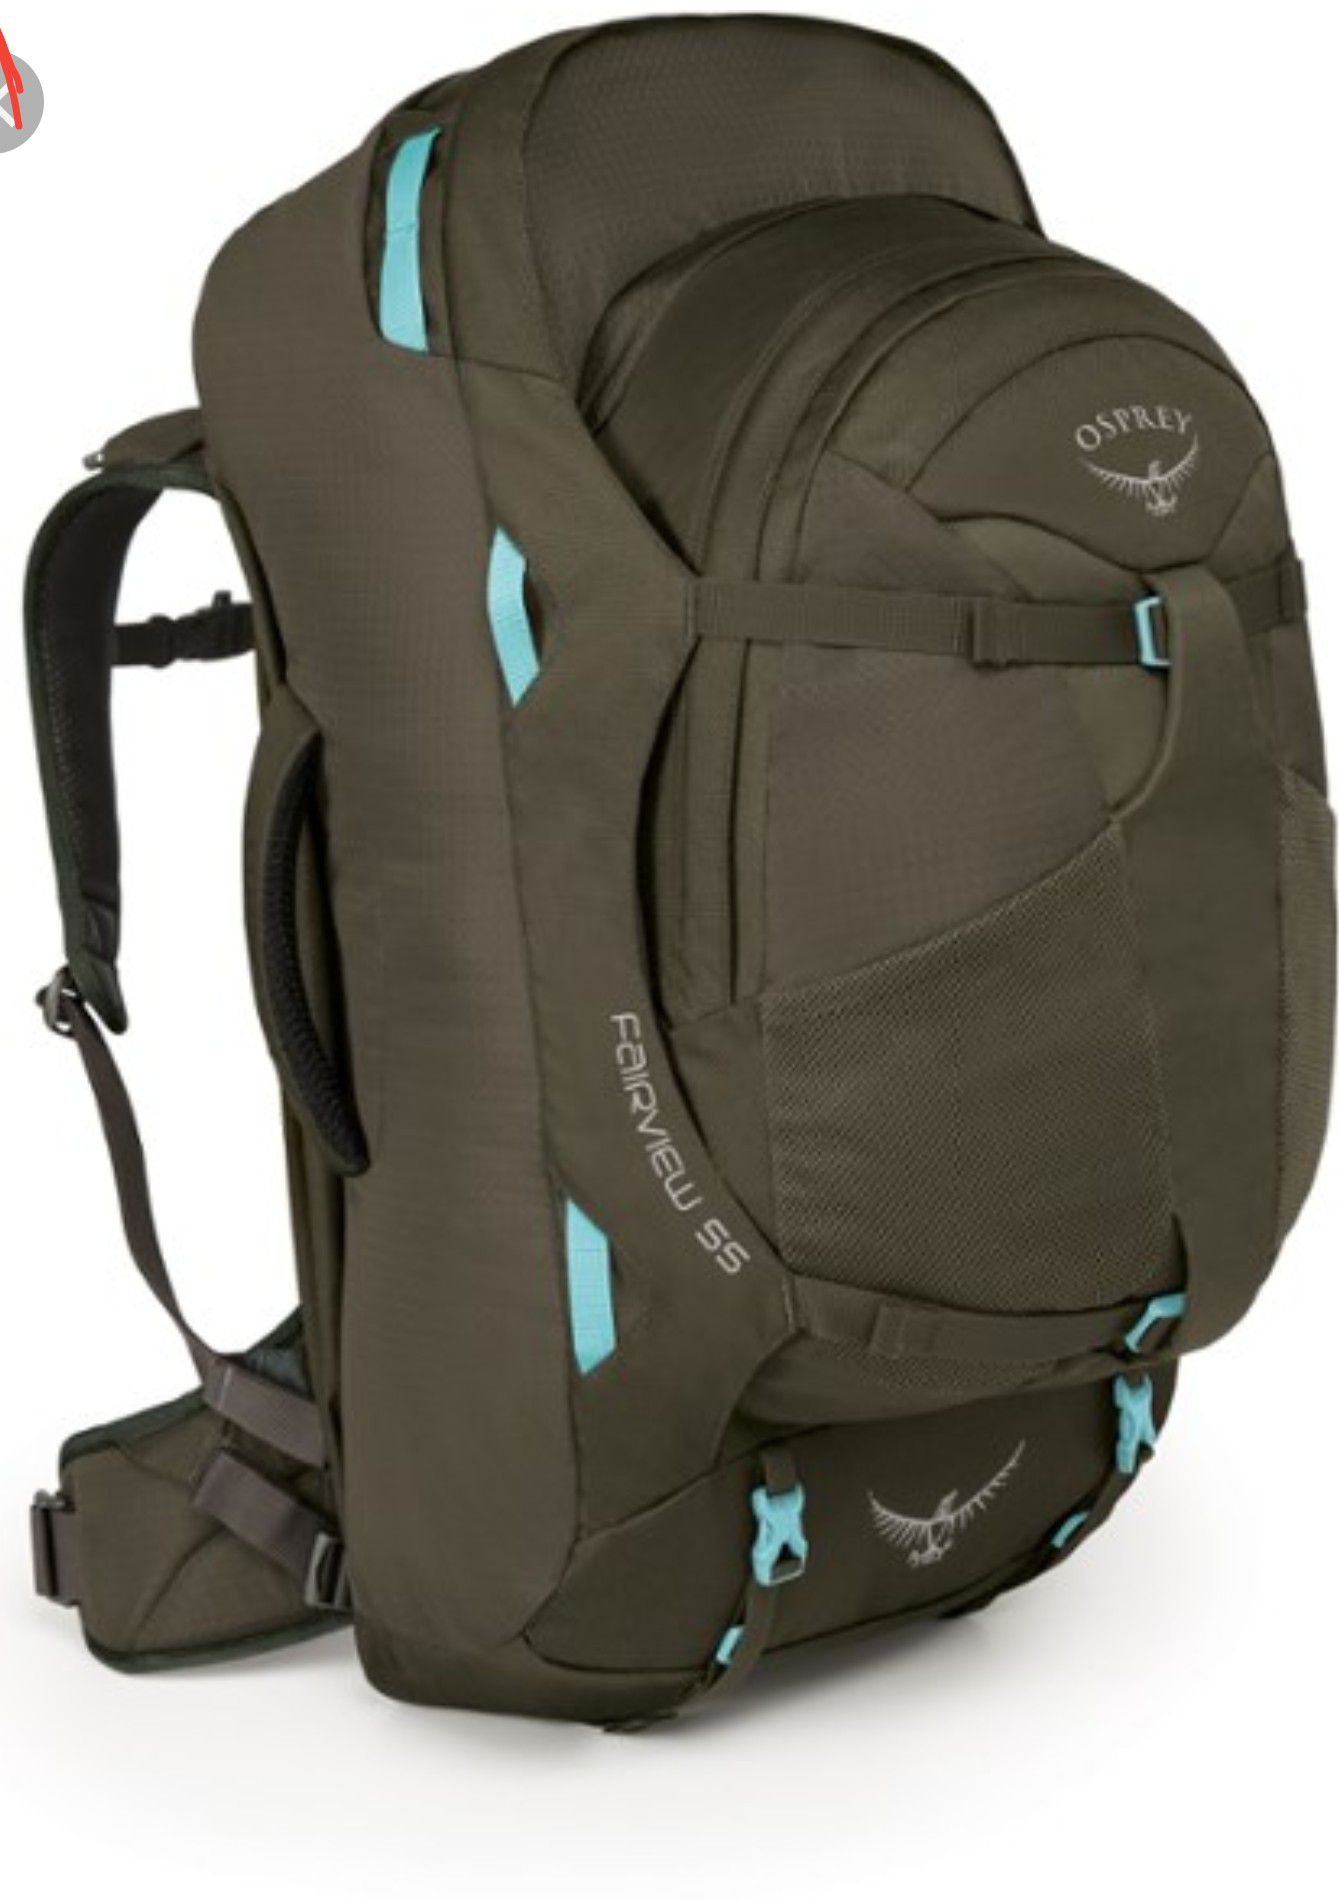 Osprey Fairview Day traveling backpack